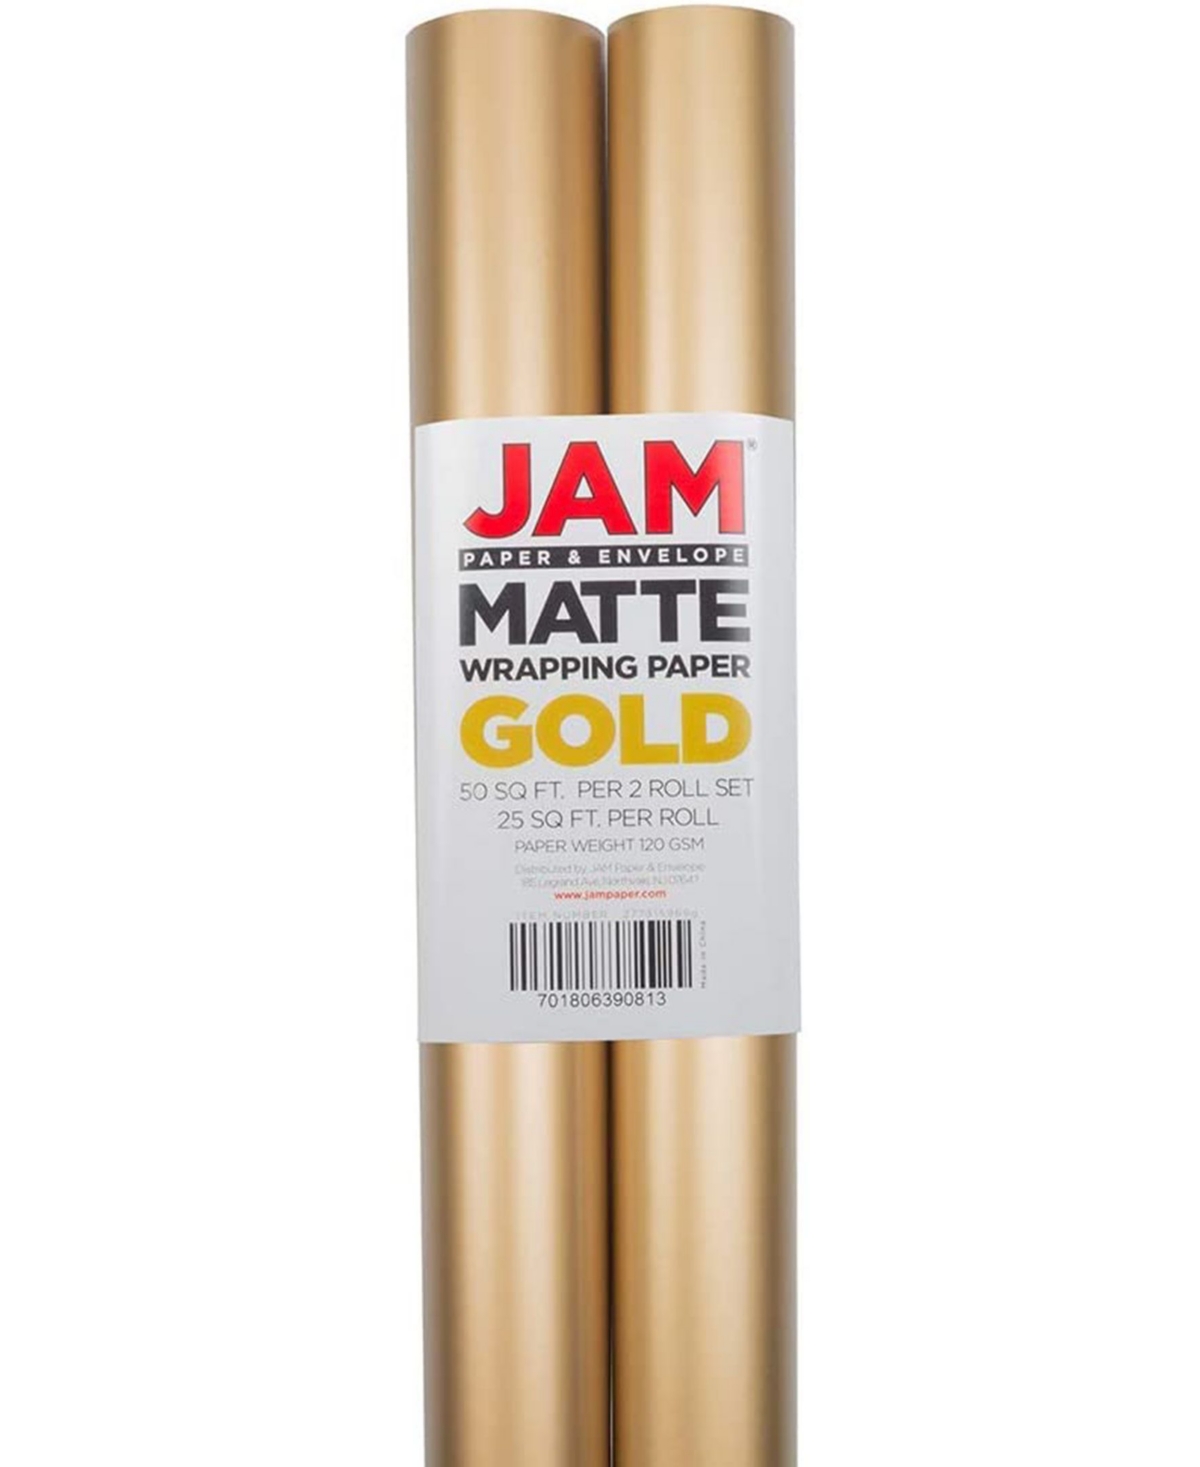 Gift Wrap 50 Square Feet Matte Wrapping Paper Rolls, Pack of 2 - Matte Gold-Tone